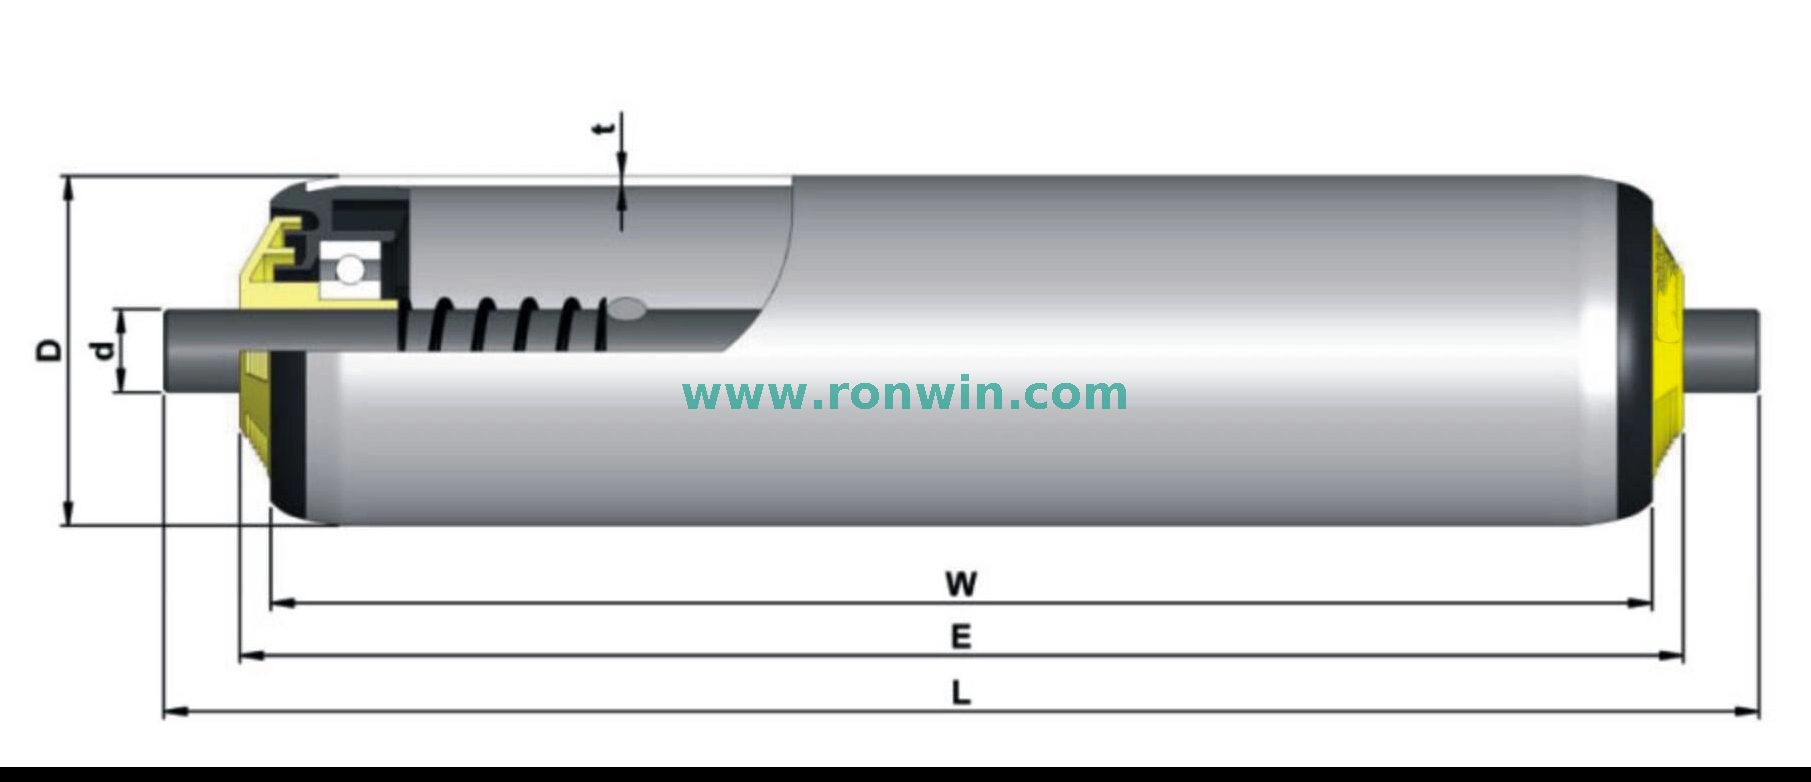 What are the main components of a gravity conveyor roller?